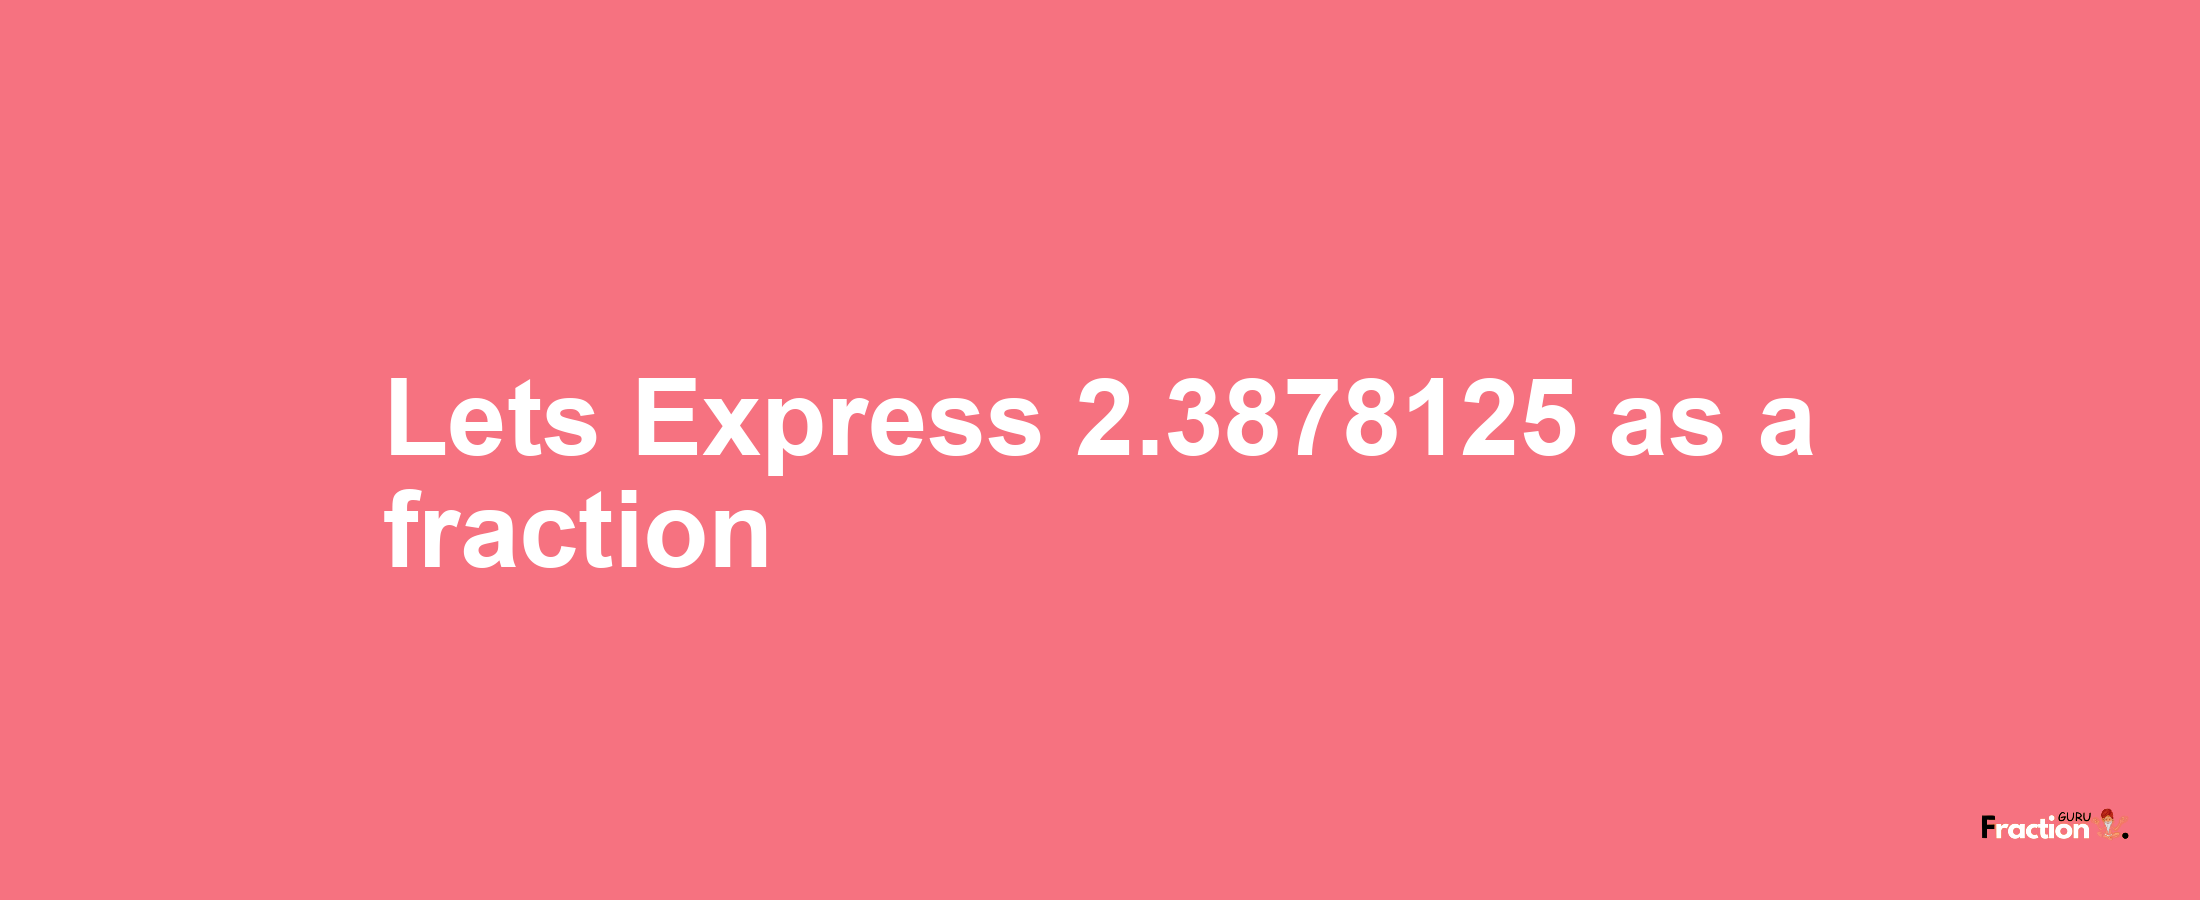 Lets Express 2.3878125 as afraction